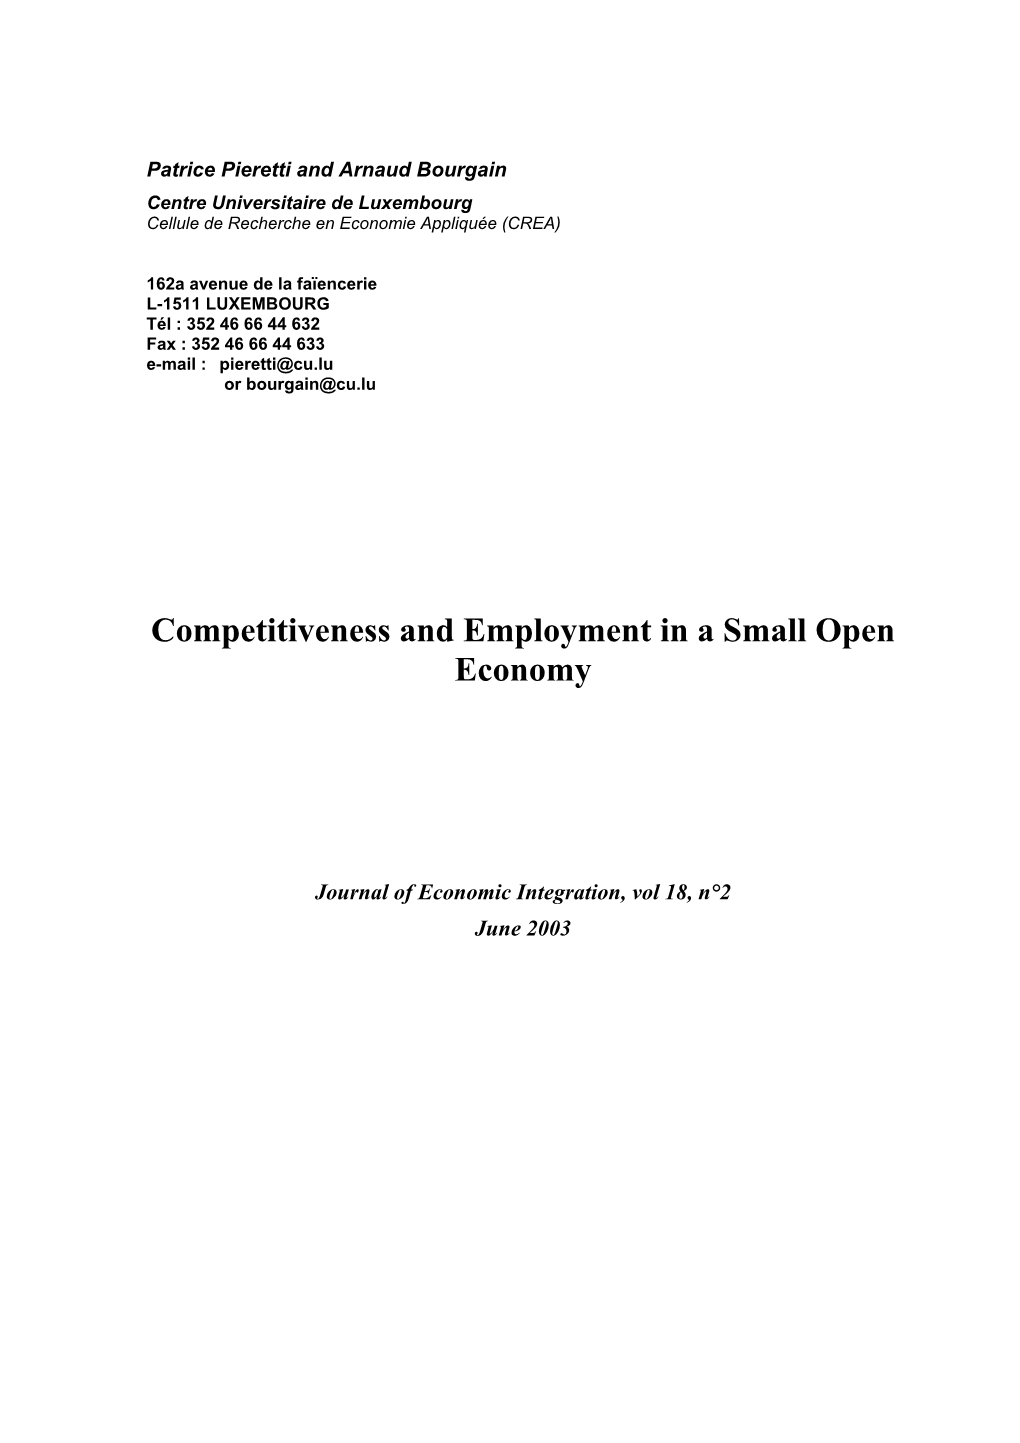 Competitiveness and Employment in a Small Open Economy